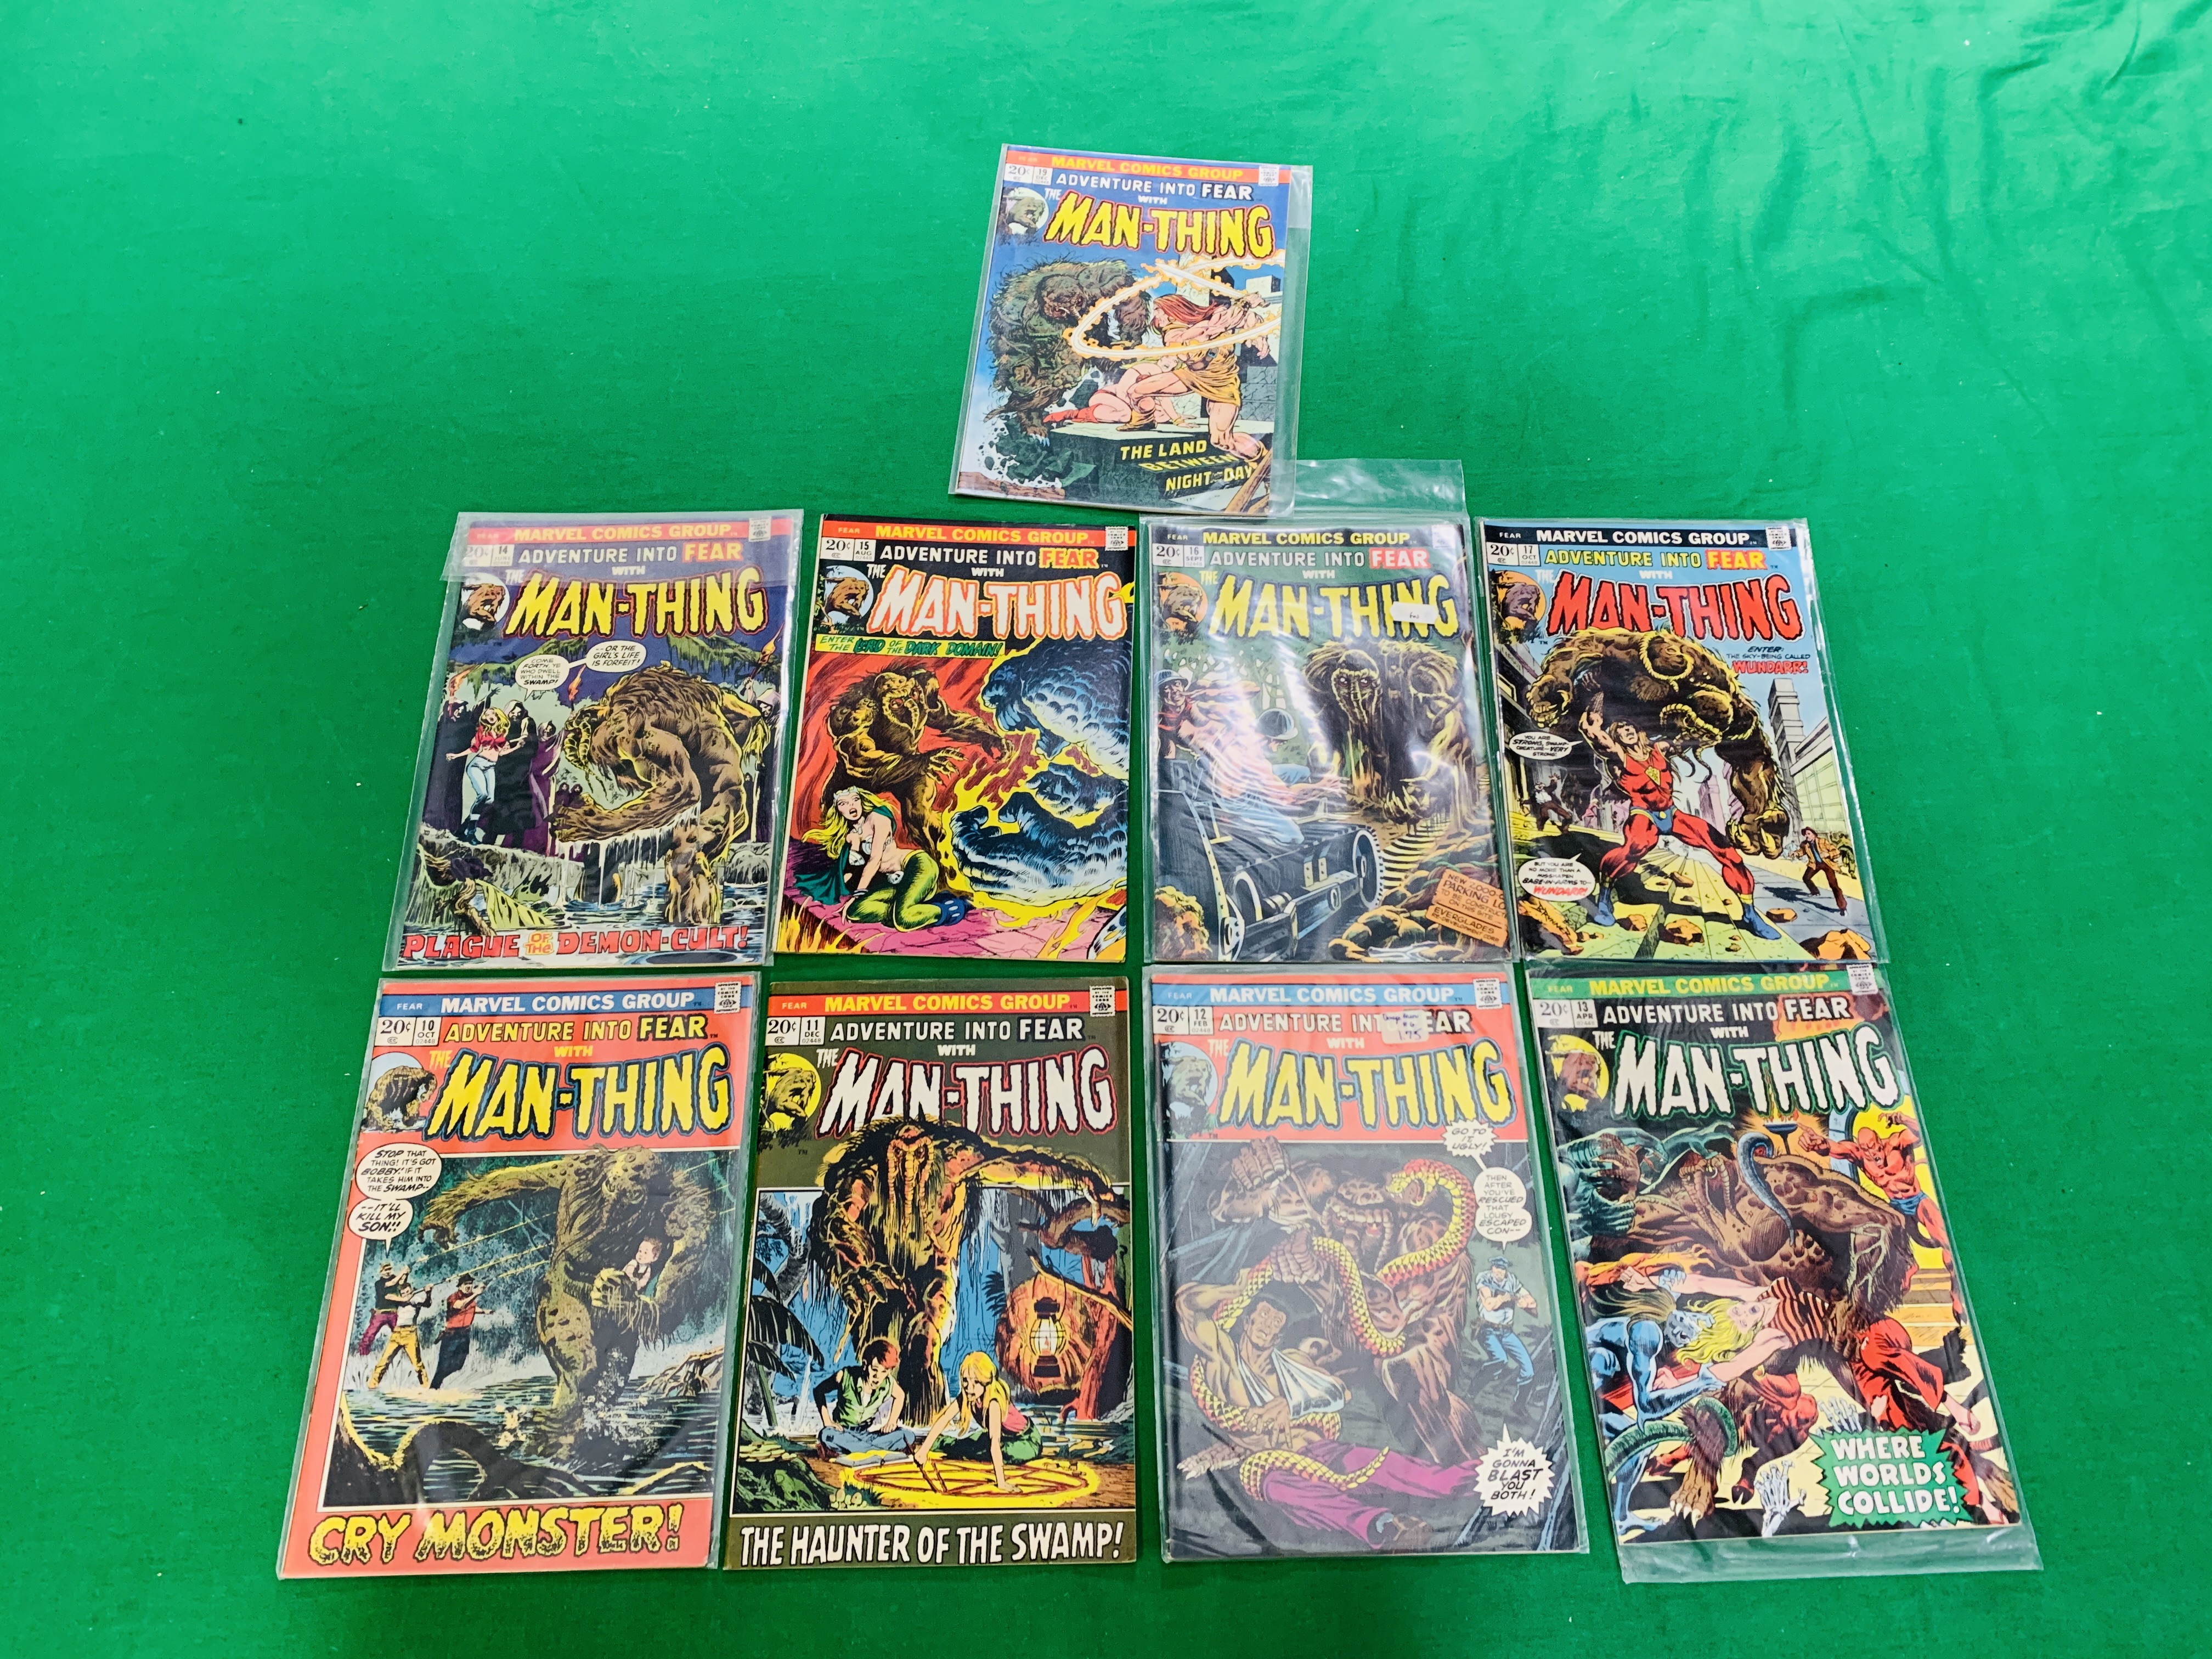 MARVEL COMICS ADVENTURE INTO FEAR WITH MAN-THING NO. 10 - 17, 19, FROM 1973. NO 19.